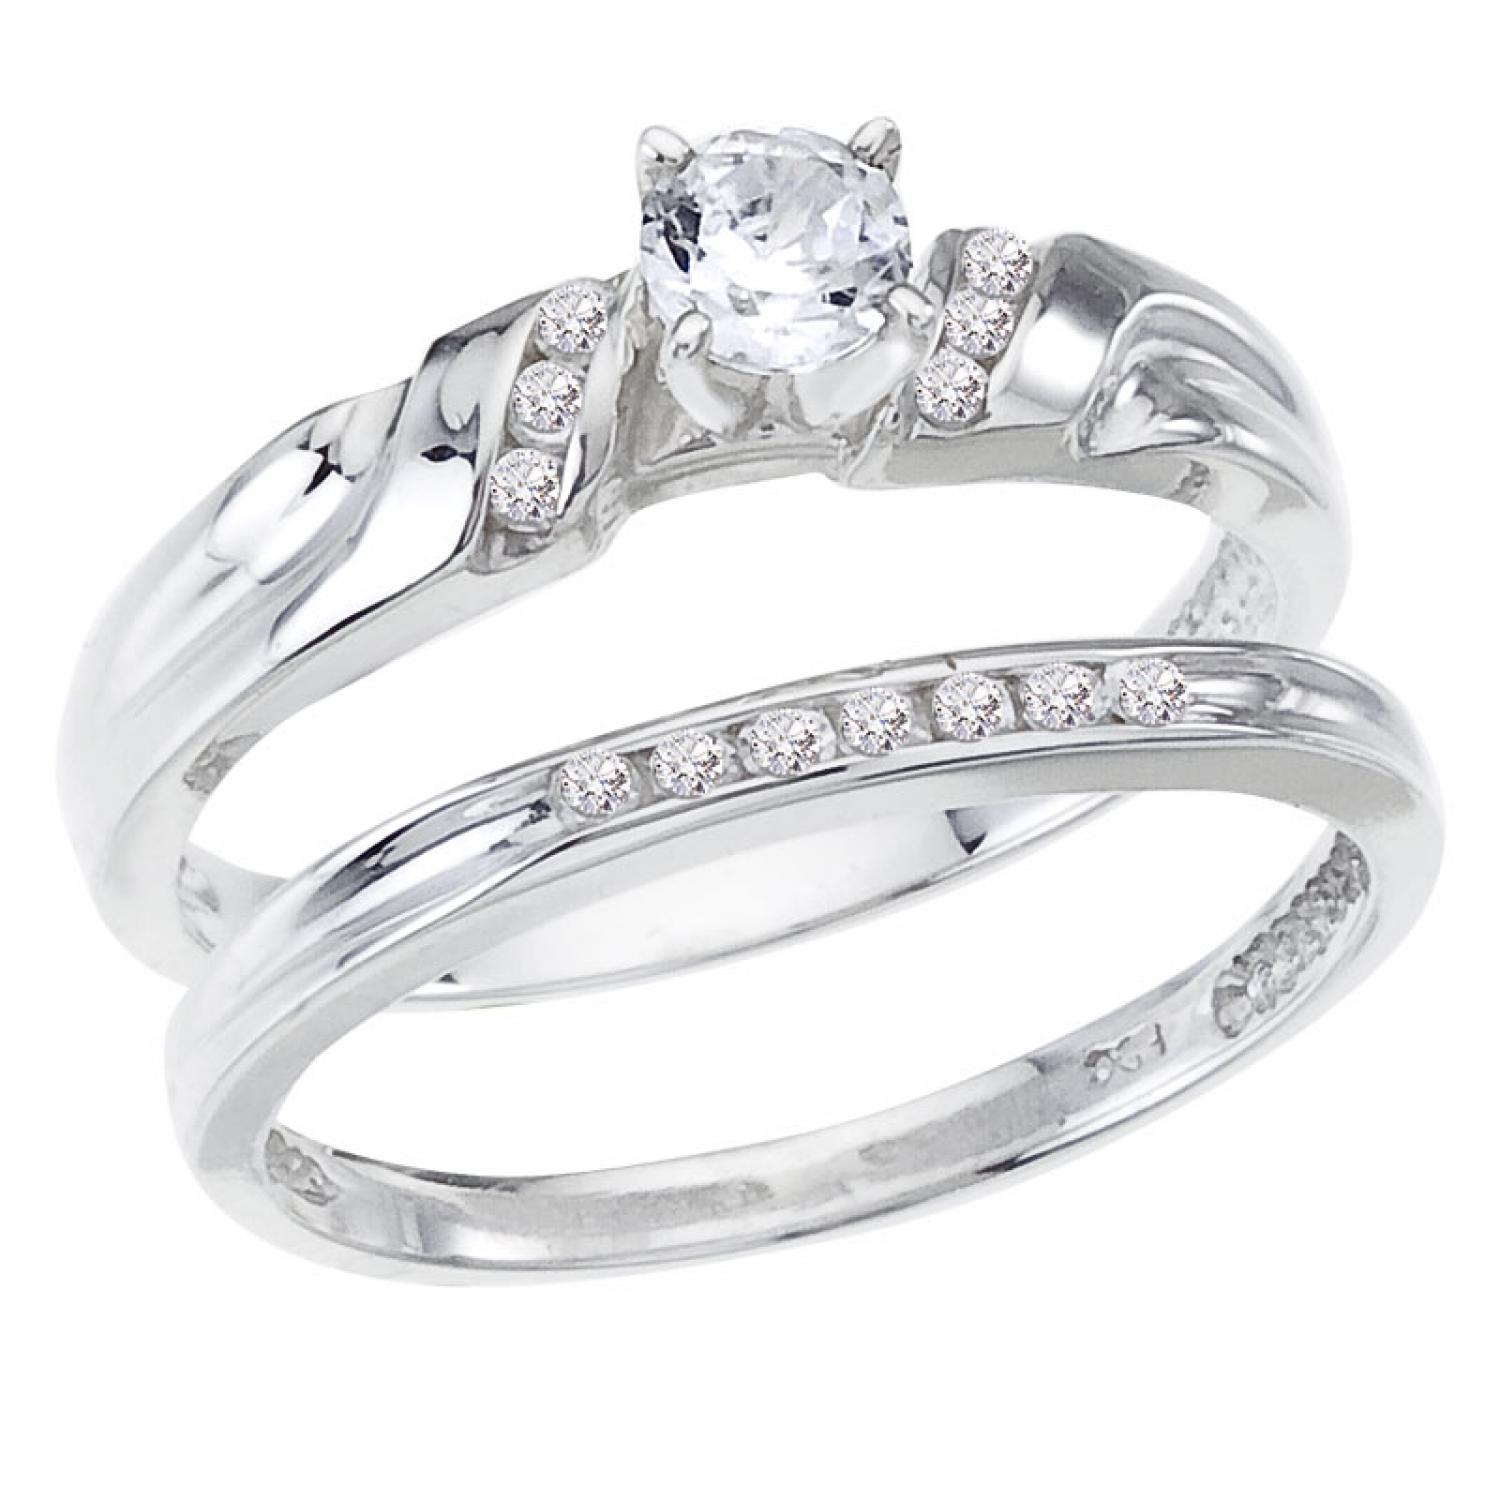 14K White Gold Qpid .33 Ct Channel Diamond Bypass Bridal Ring Set